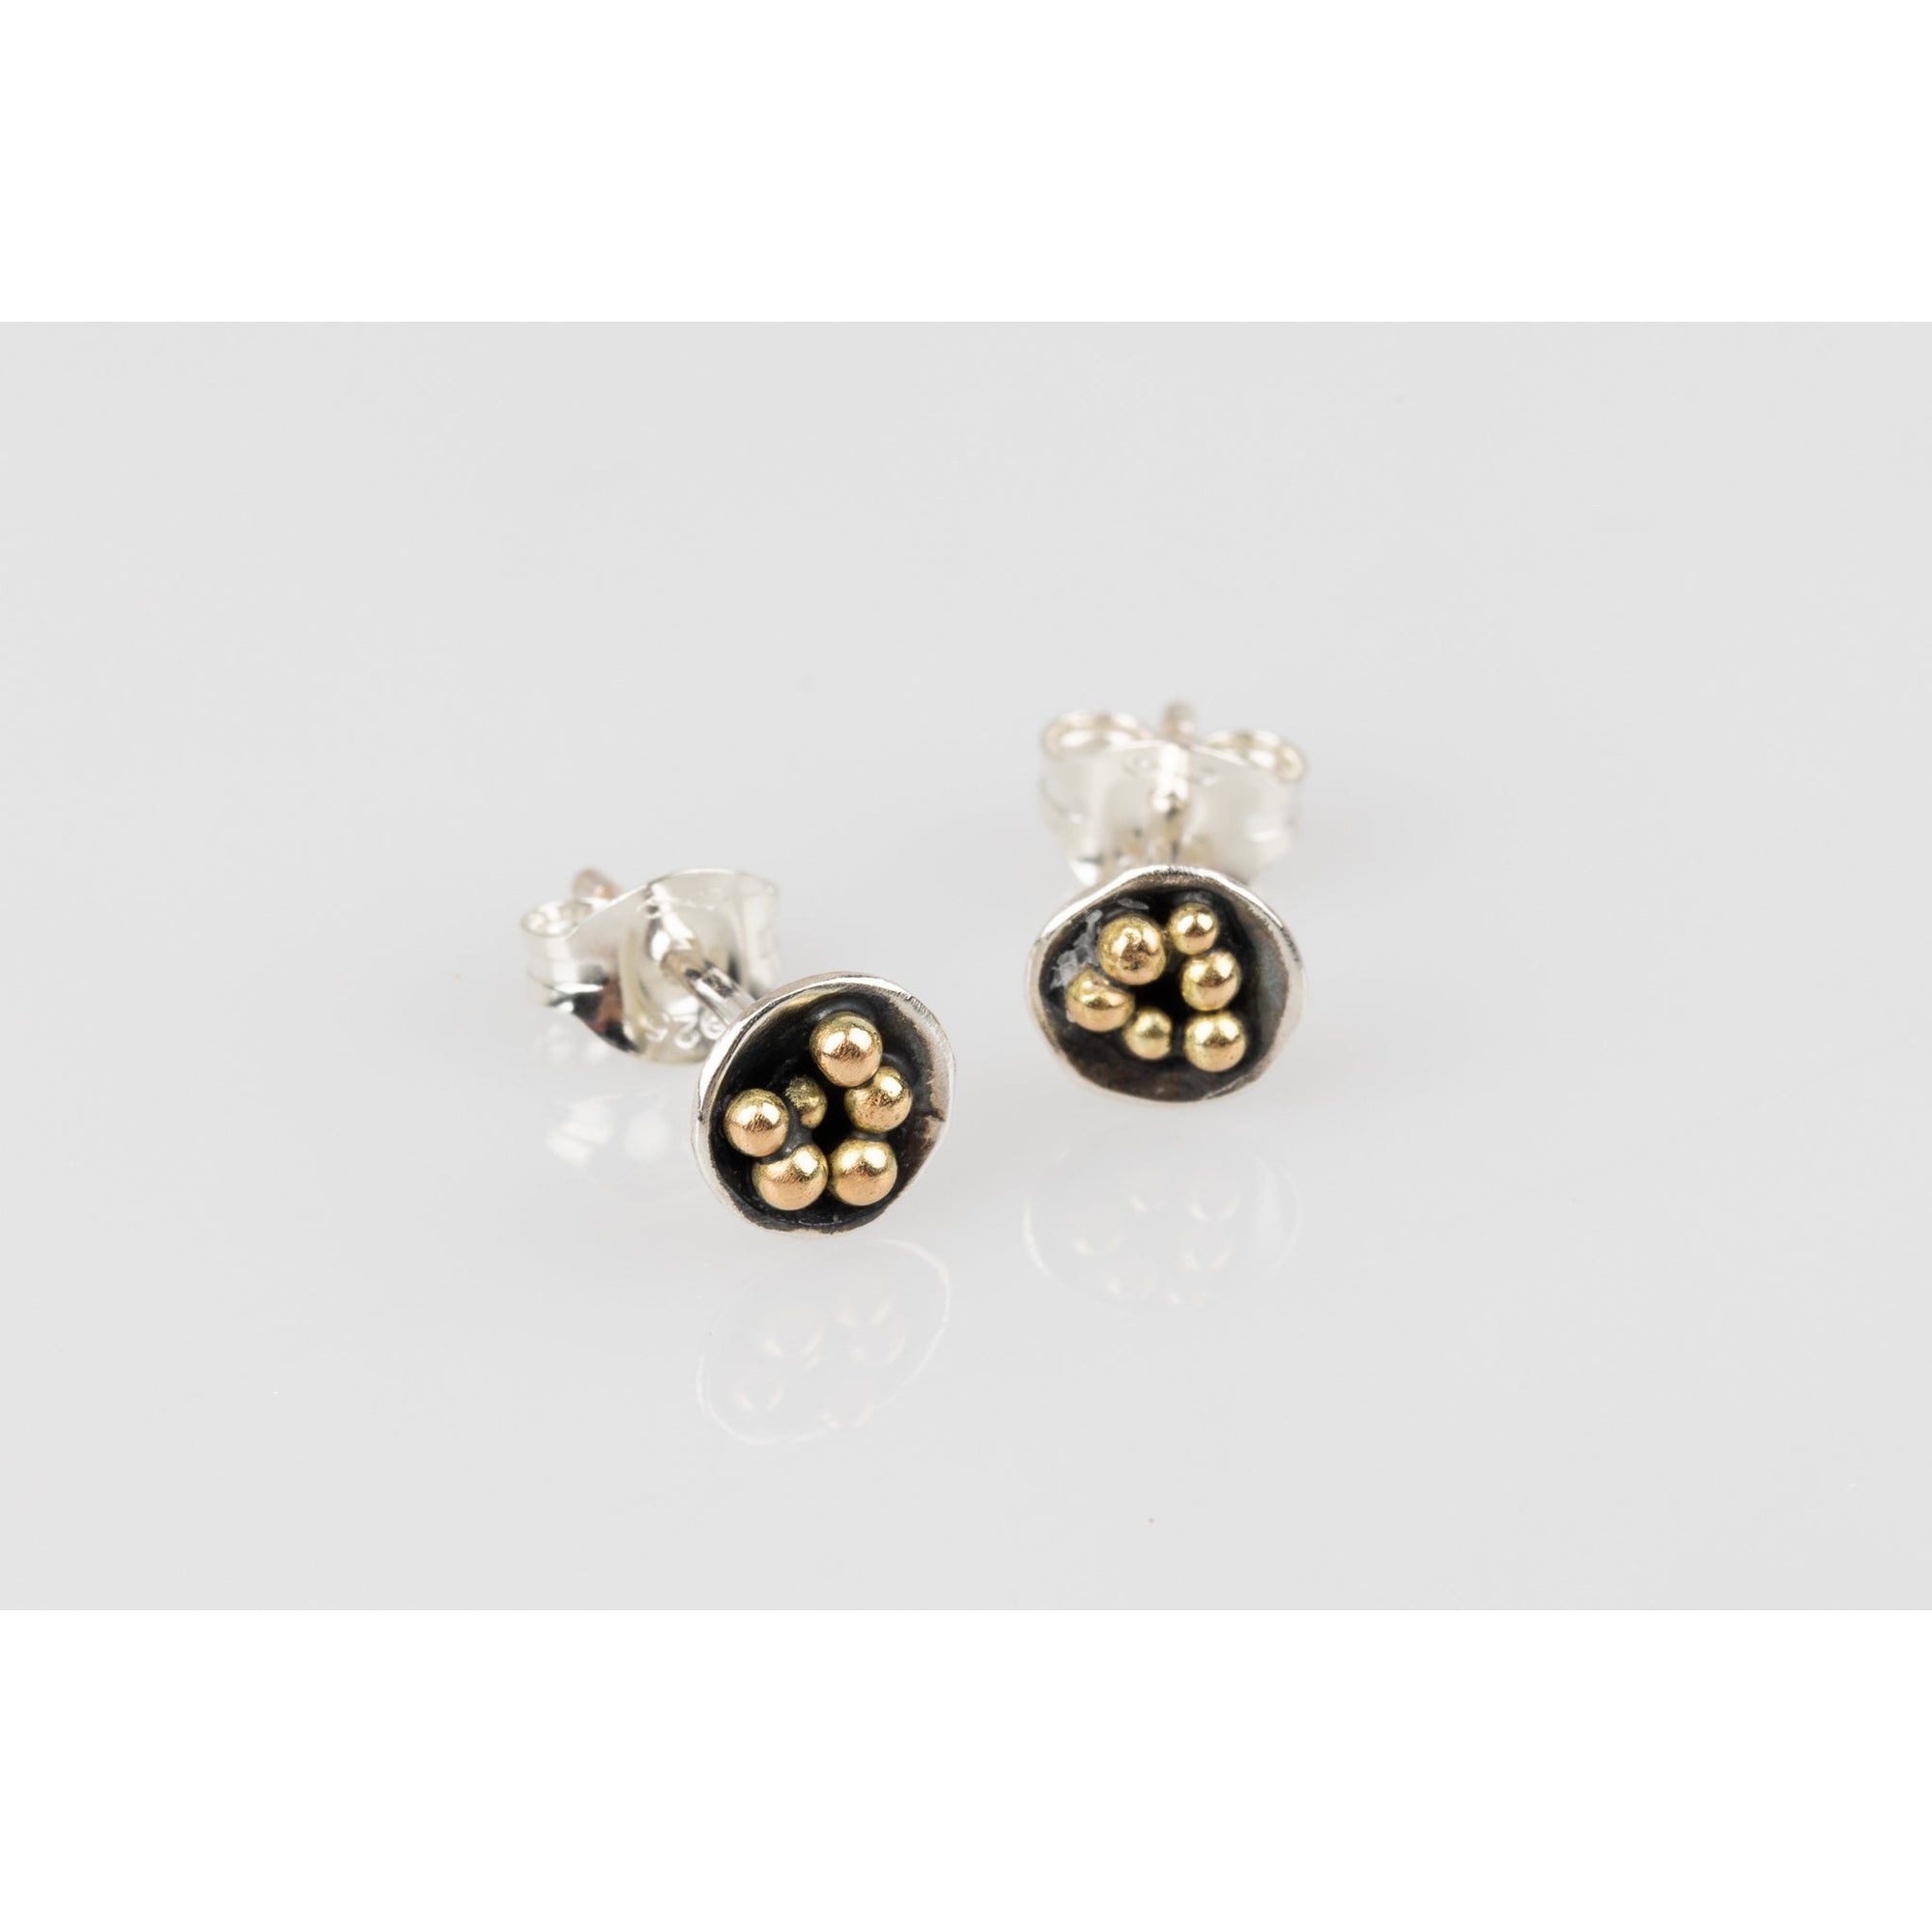 'SA Ea48 Silver oxidised studs' by Sandra Austin jewellery, available at Padstow Gallery, Cornwall